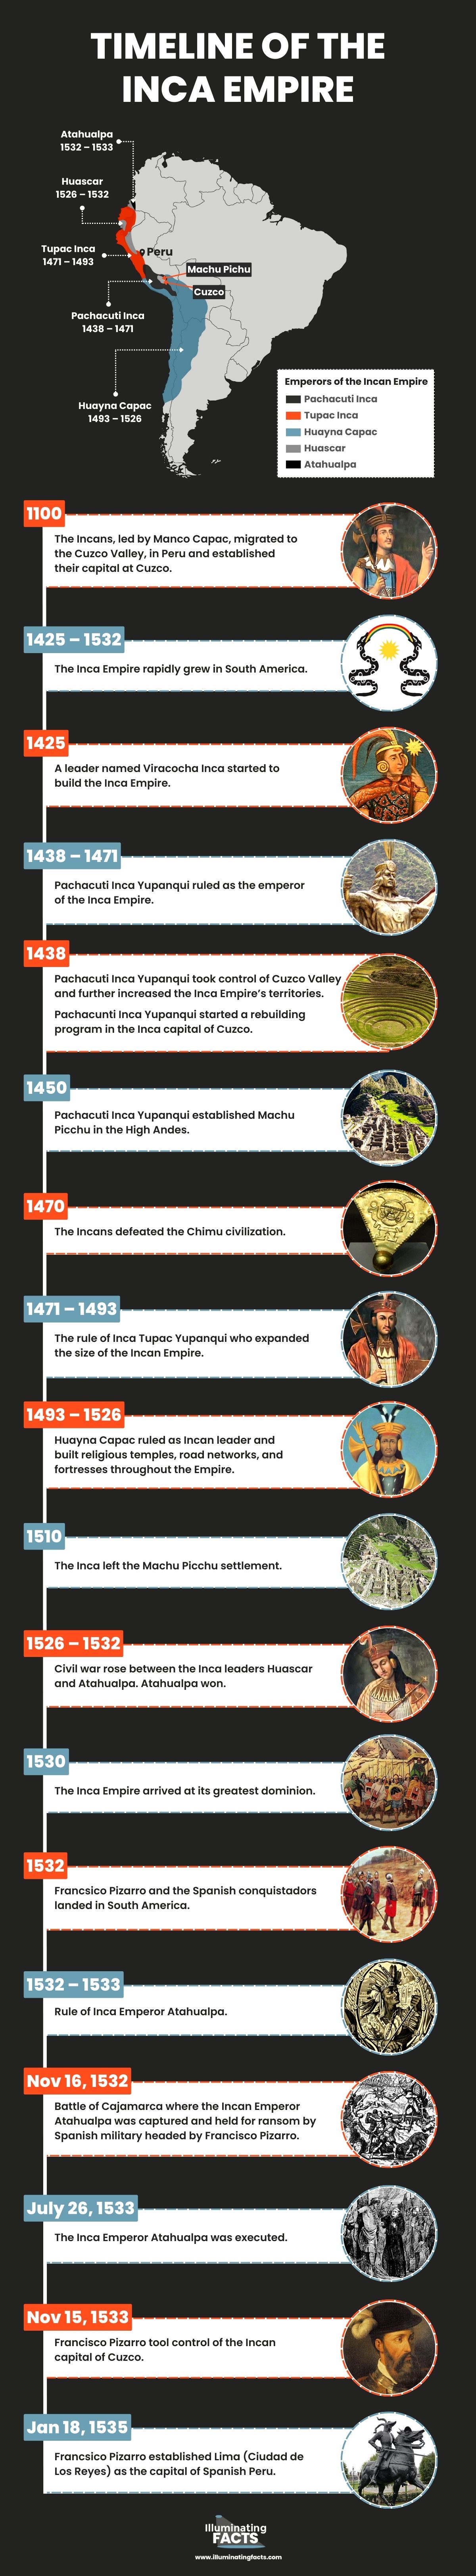 Timeline of the Inca Empire